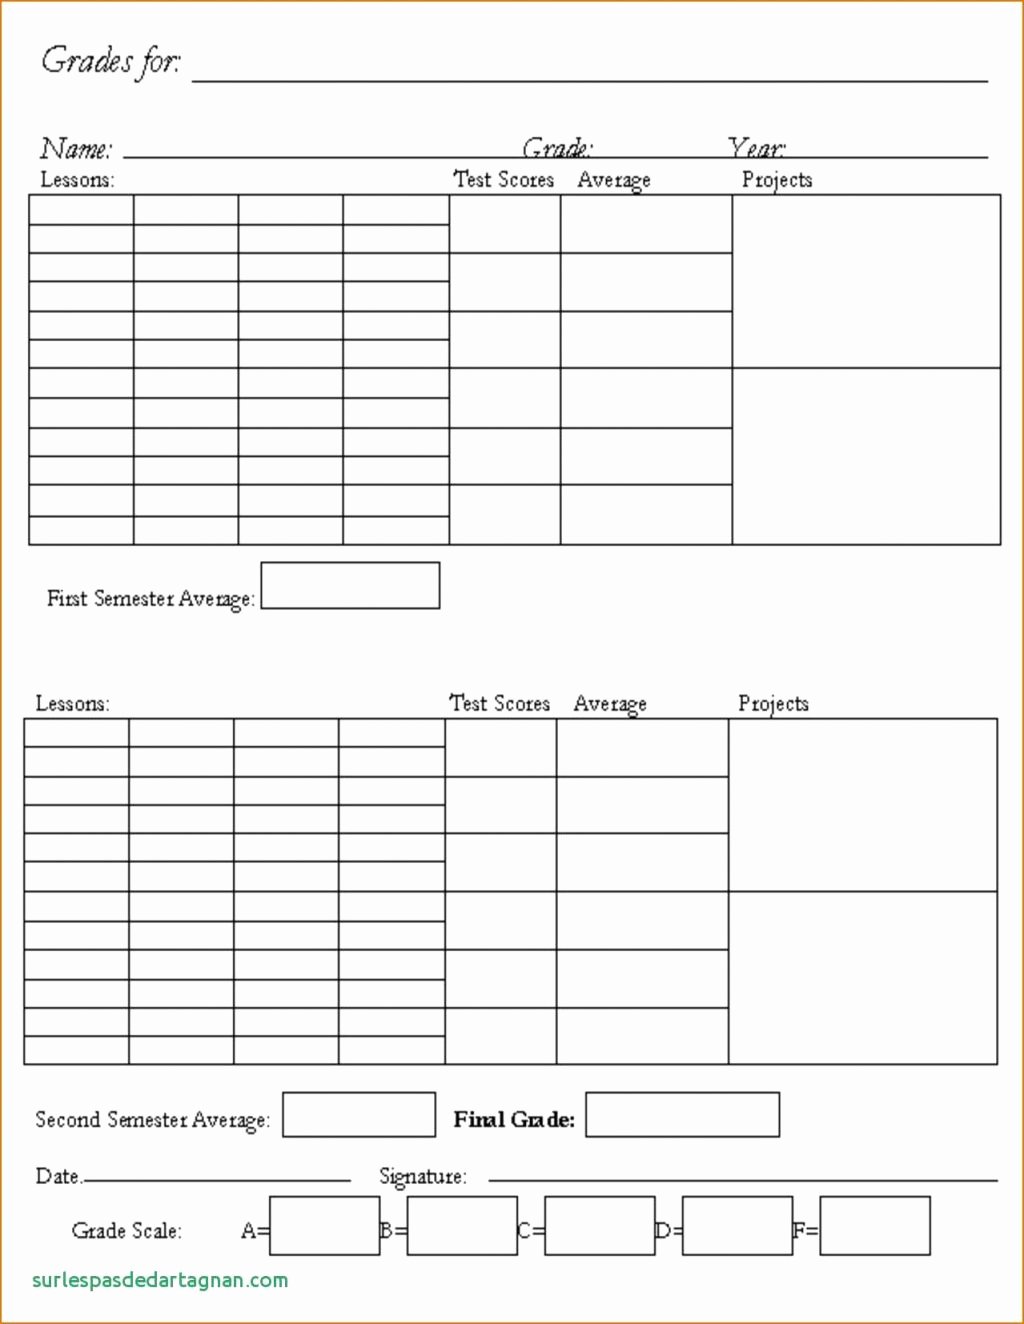 Report Card Template Excel Best Of Blank Report Card Template Gidiyeredformapoliticaco In